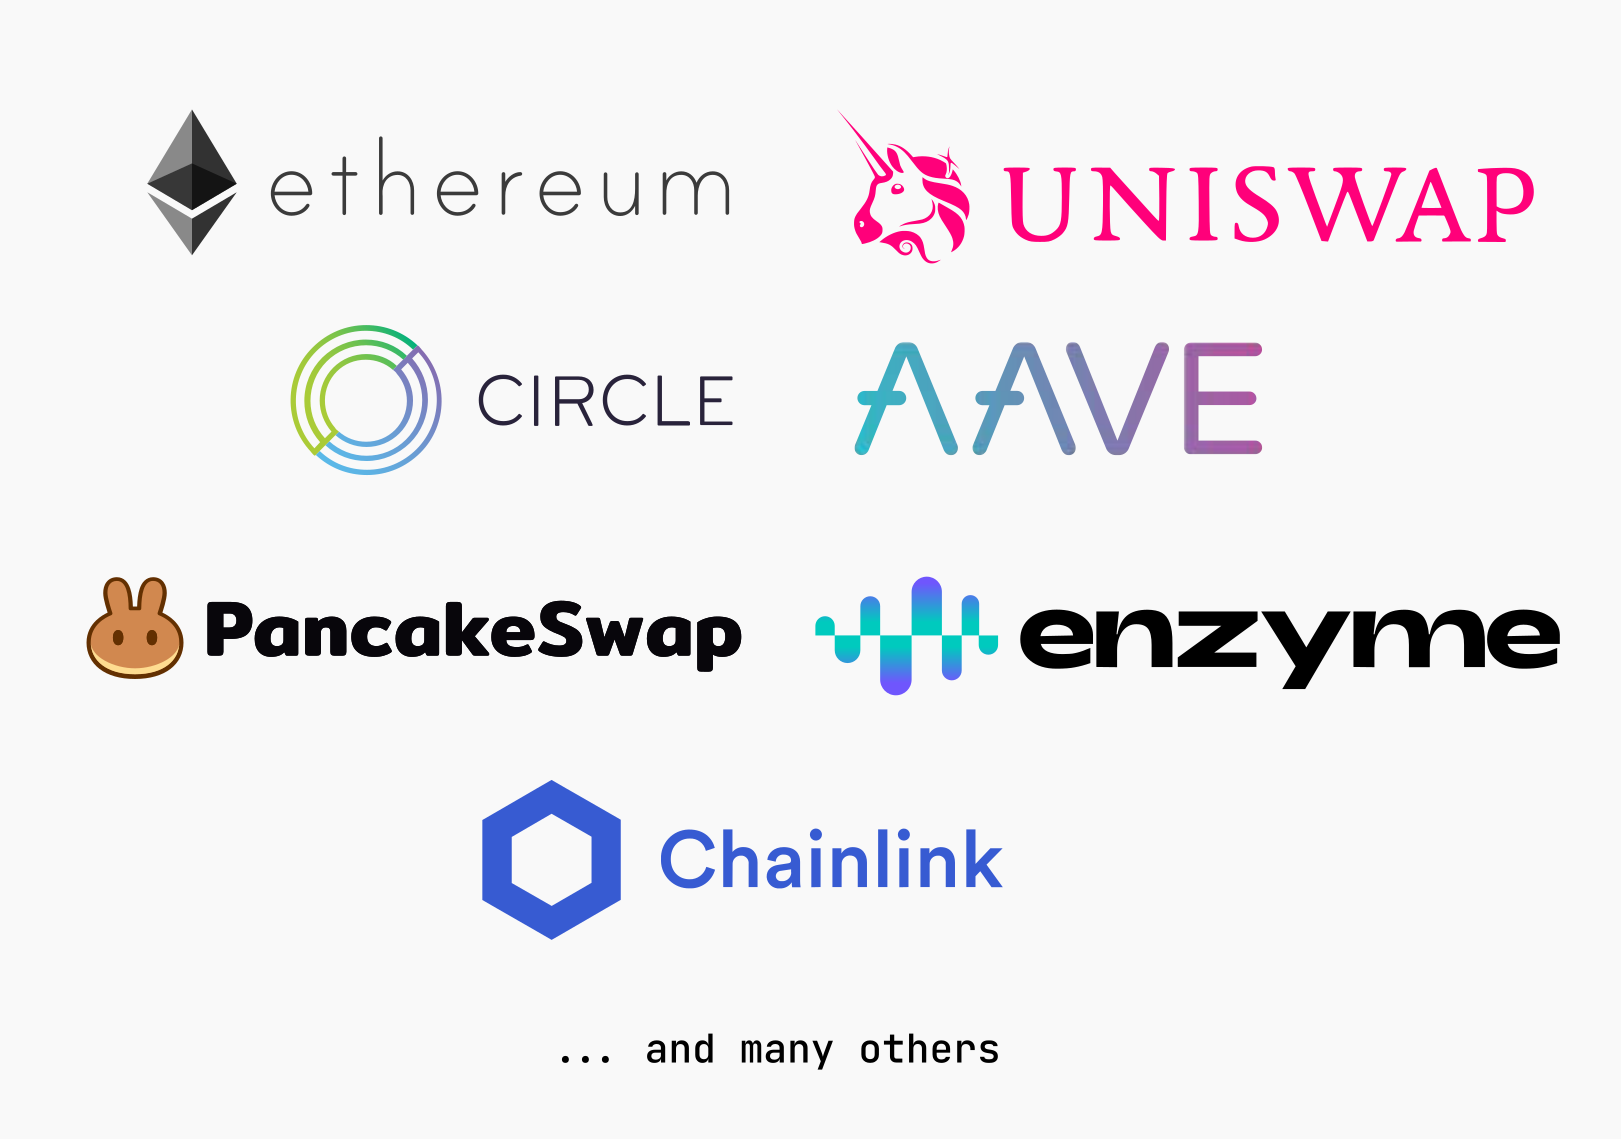 Supported protocols include Uniswap, Aave, others